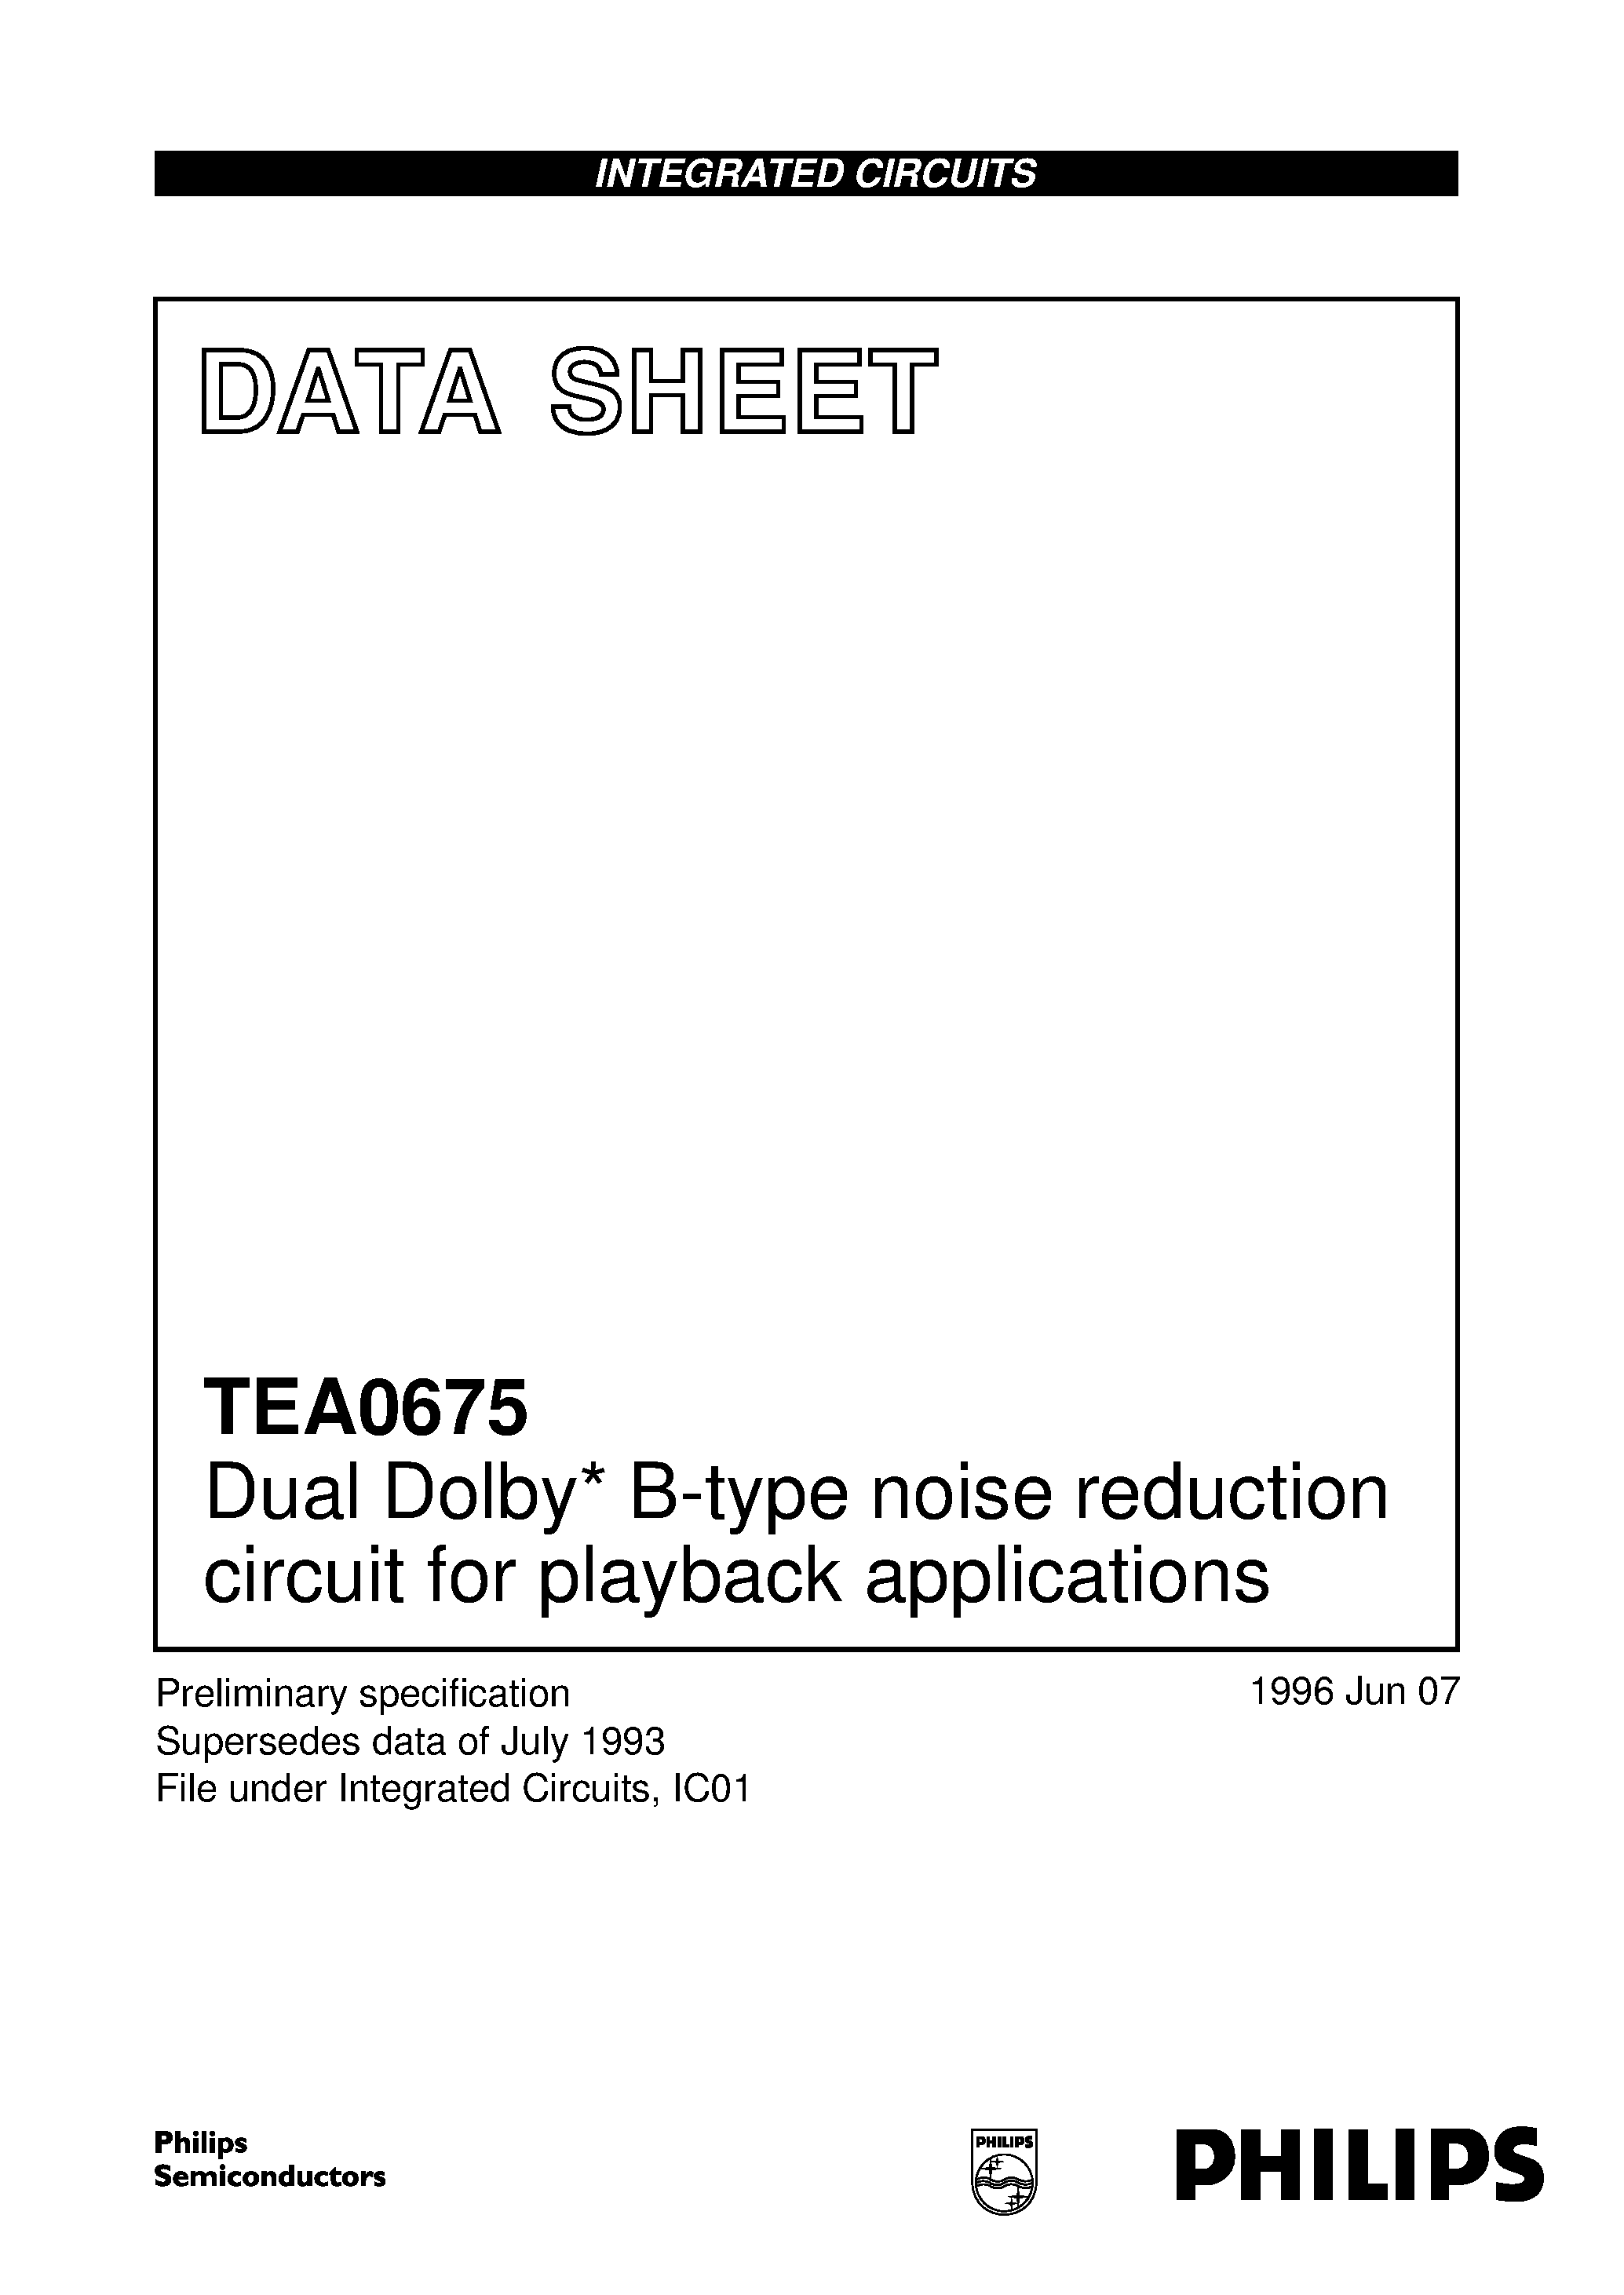 Datasheet TEA0675T - Dual Dolby* B-type noise reduction circuit for playback applications page 1